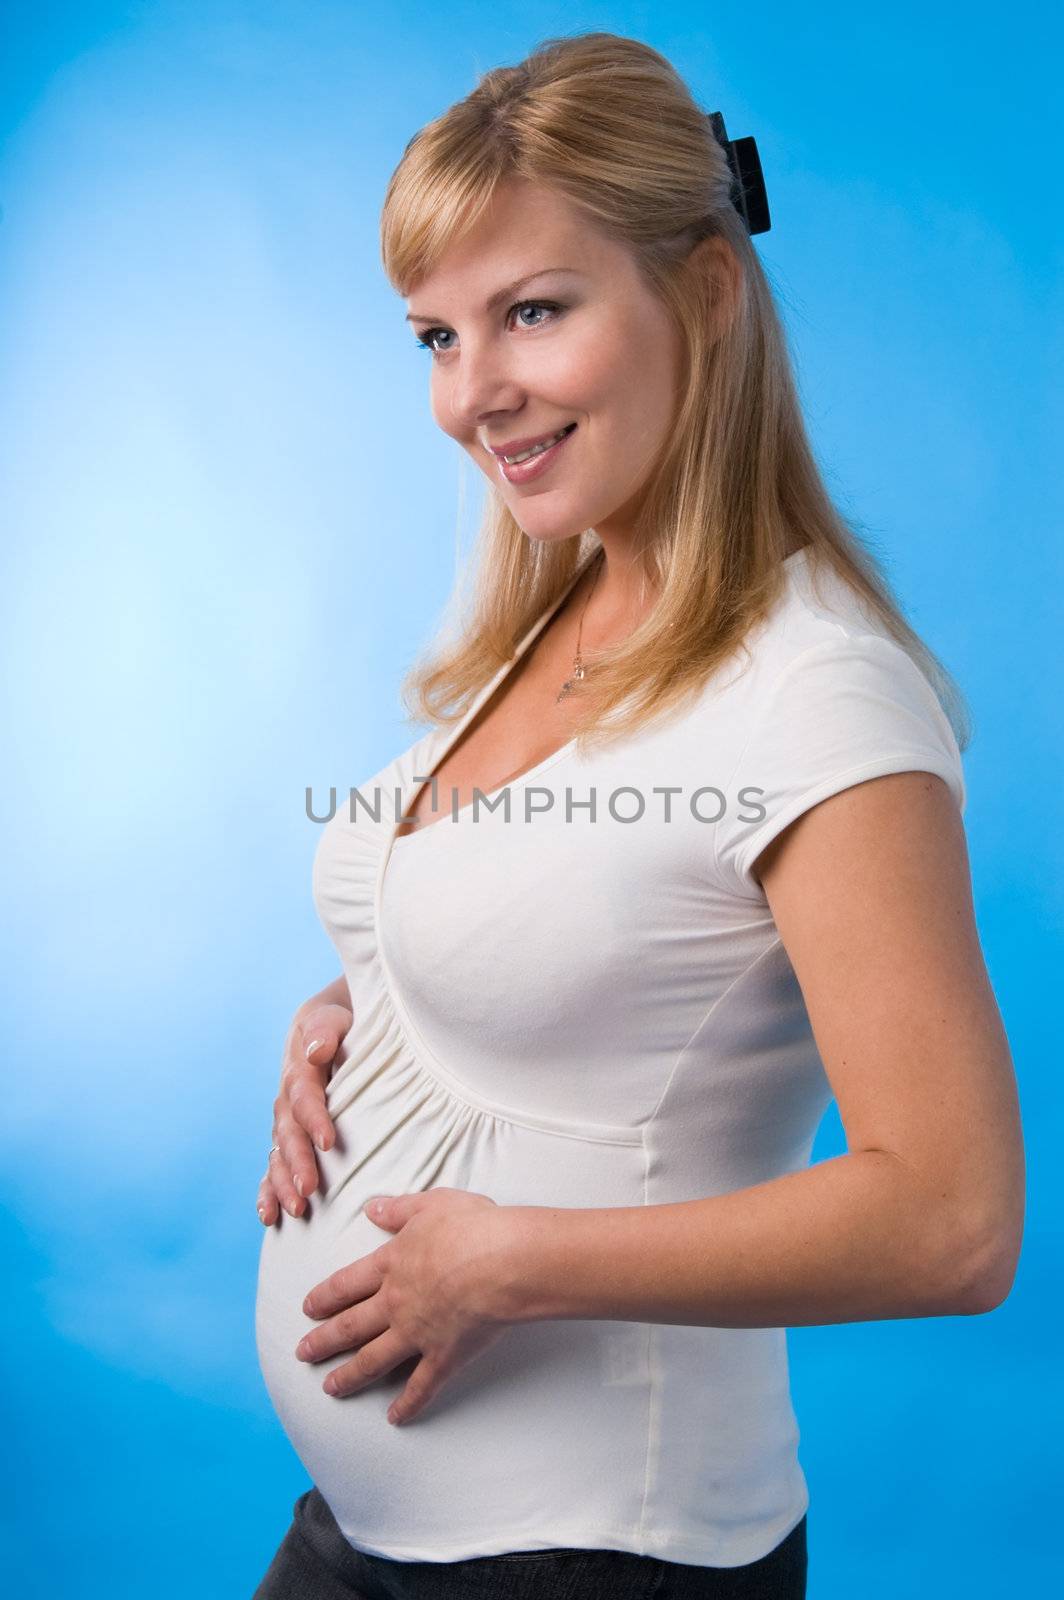 Pregnancy by andyphoto